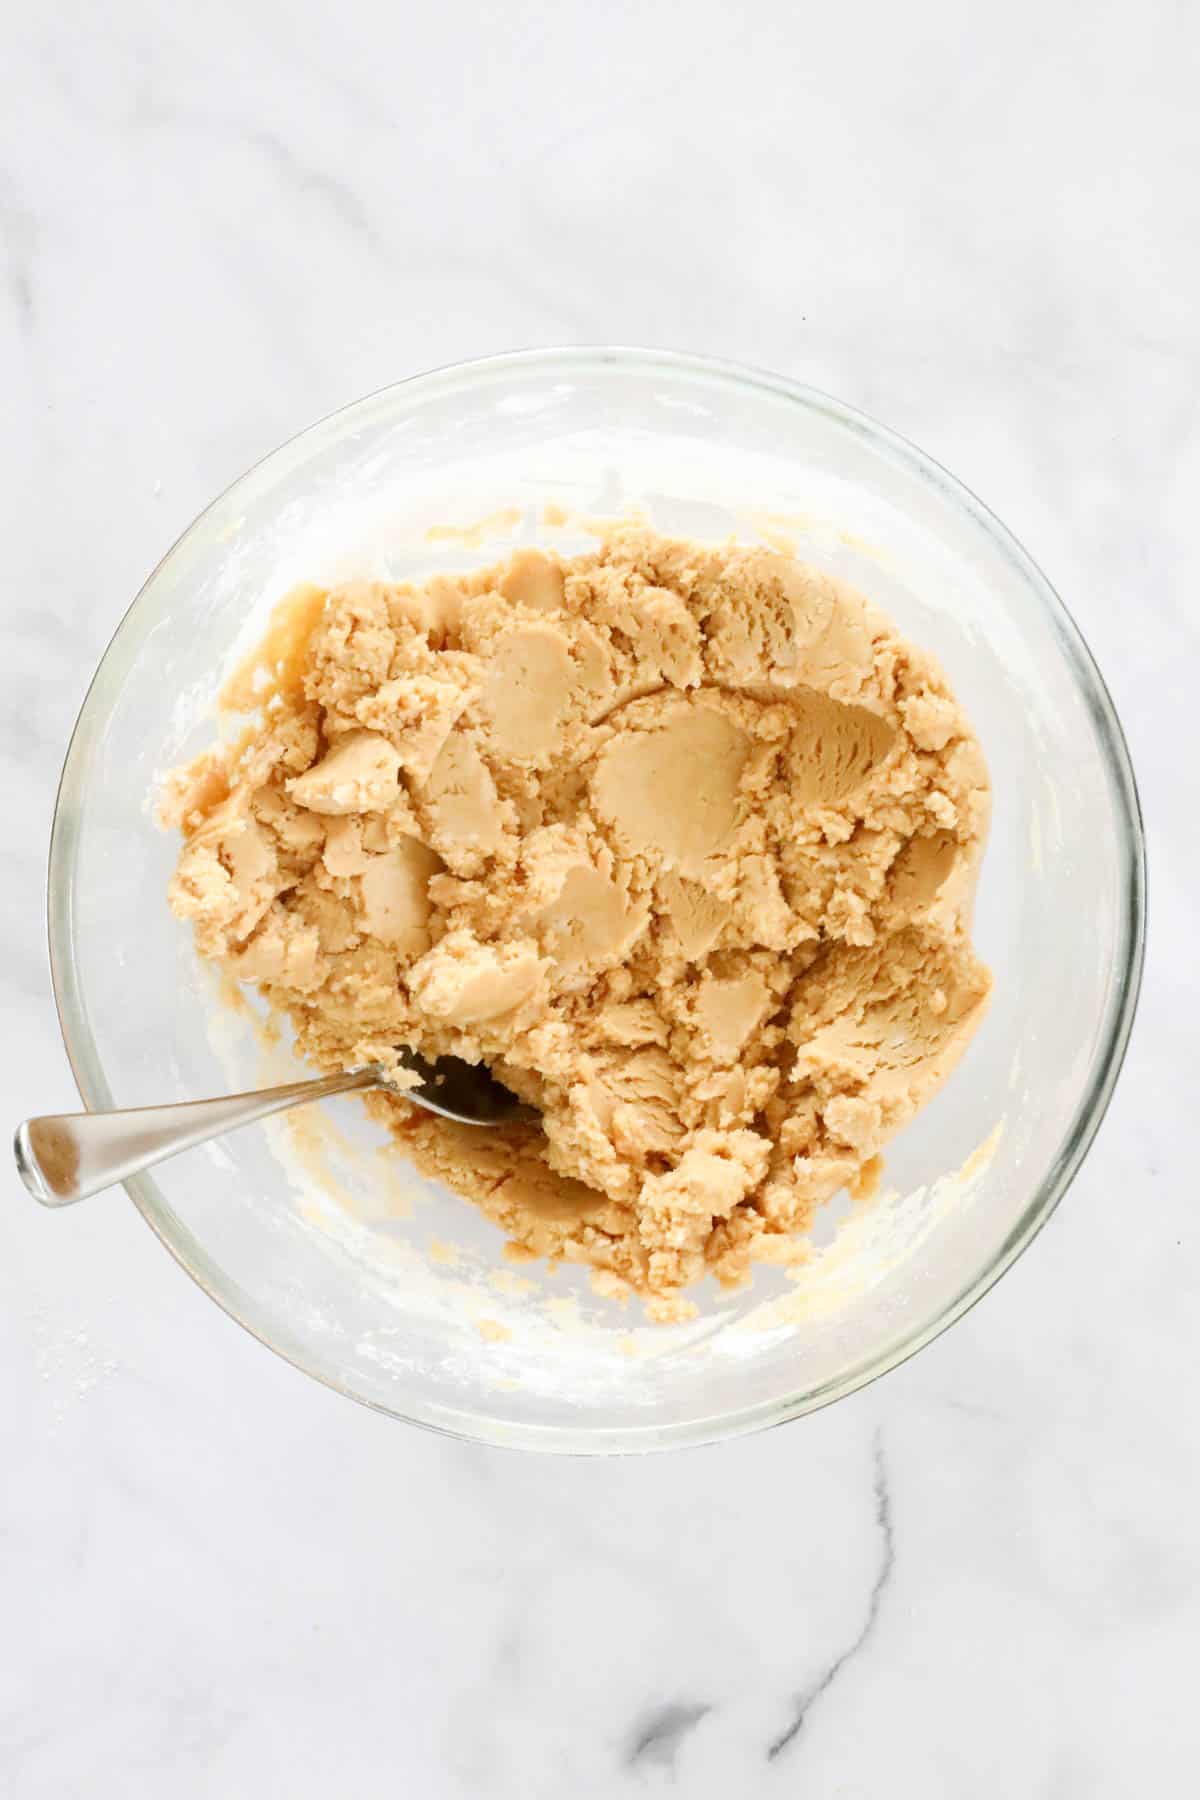 Thick fudge mixture in a bowl with a spoon.